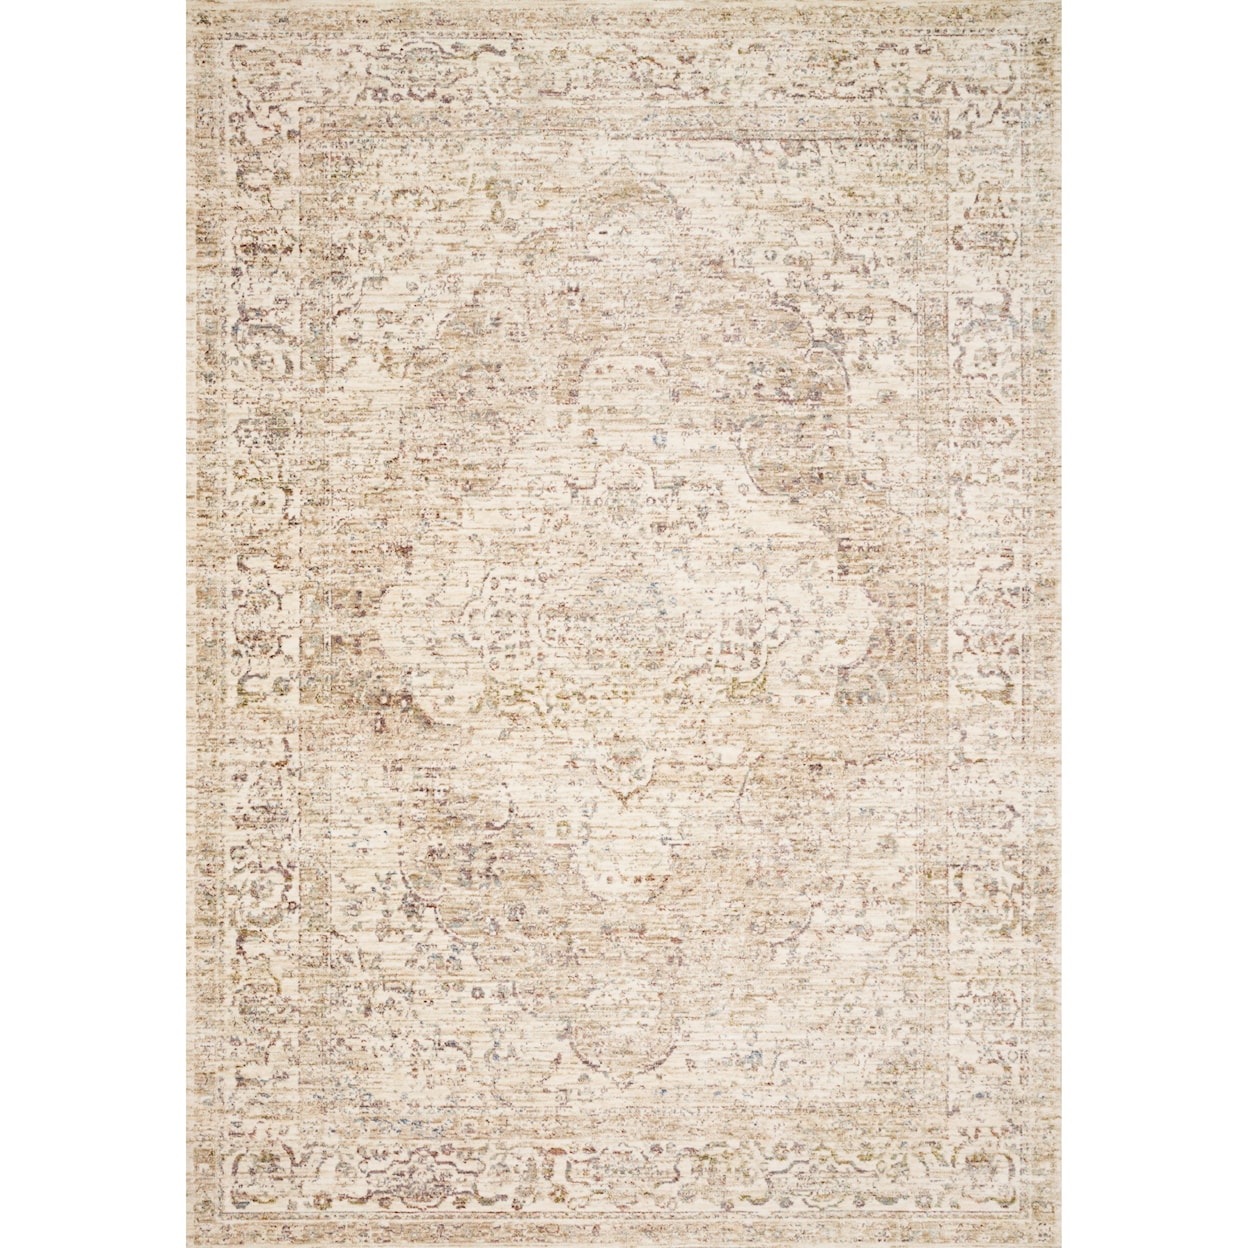 Loloi Rugs Revere 9'6" x 12'5" Ivory / Berry Rug